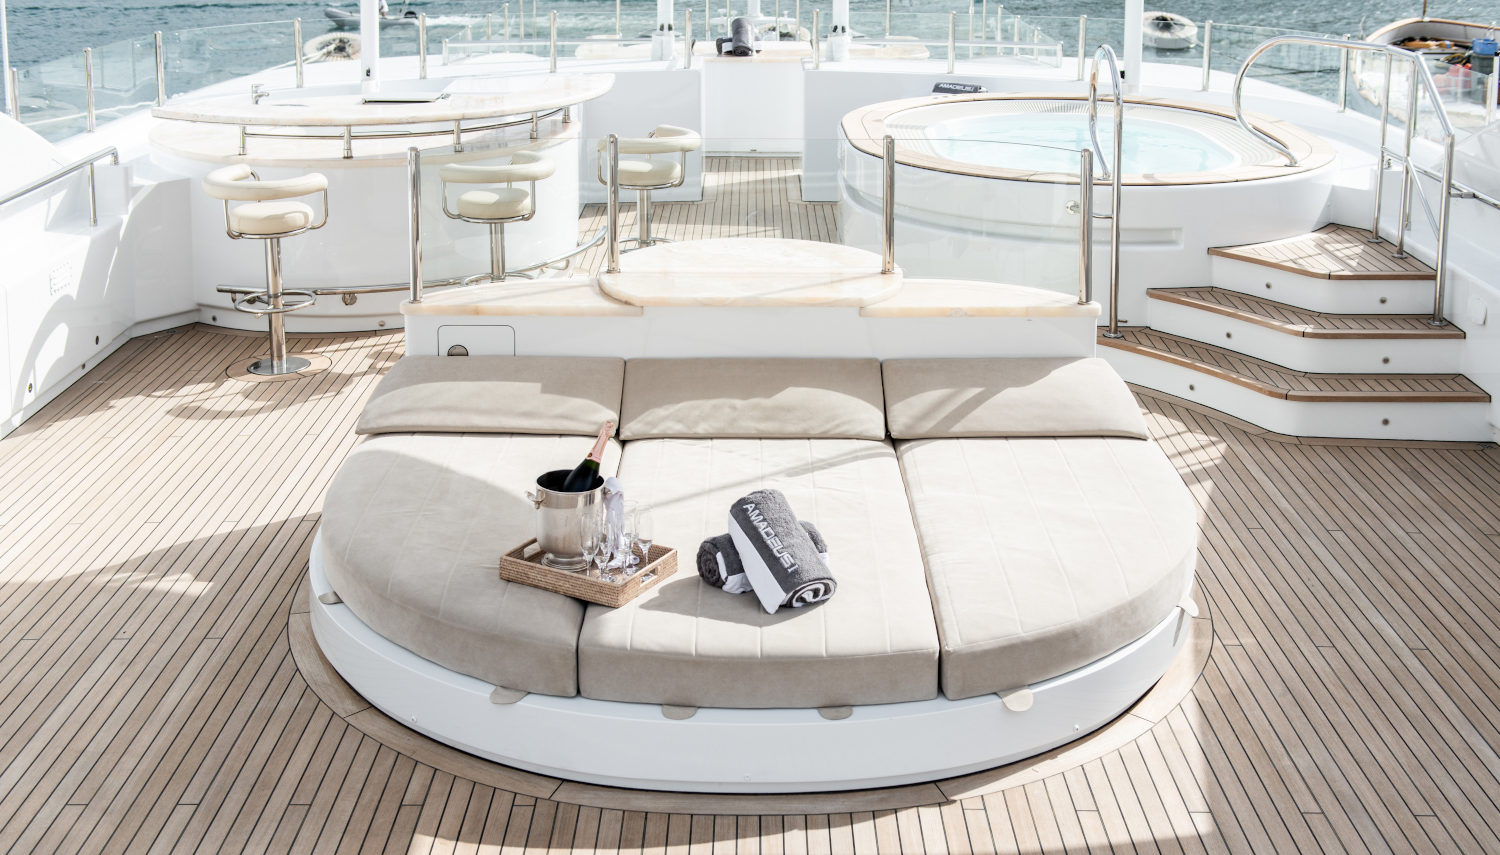 Vripack - Amadeus-I - Exterior of the sundeck with Jacuzzi - Relaxing area - Enjoying life at sea - Yacht for charter